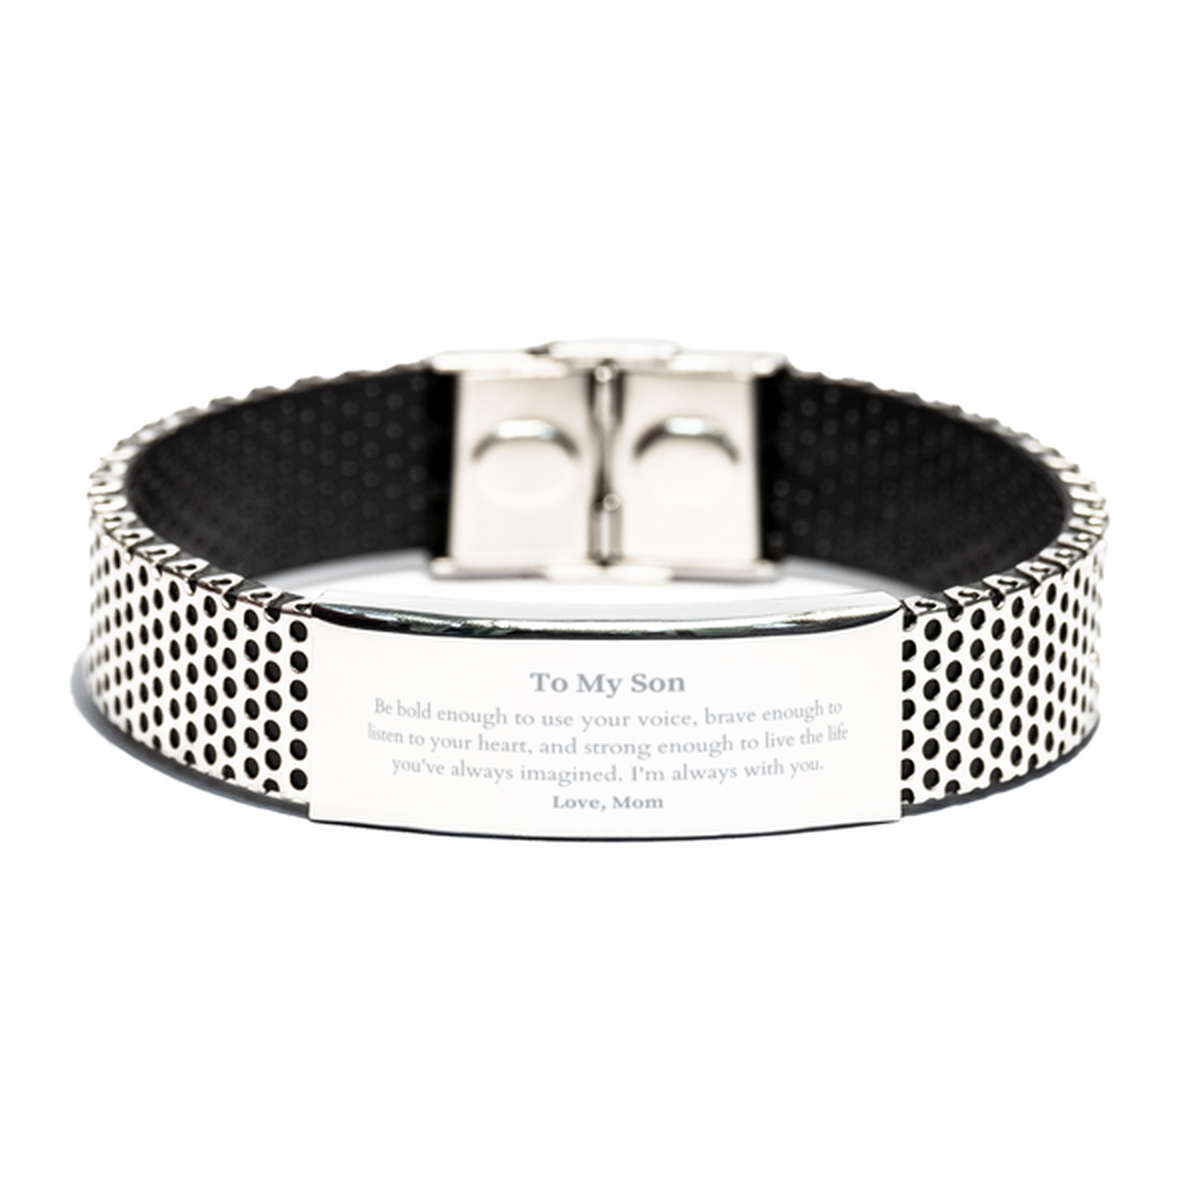 Keepsake Son Stainless Steel Bracelet Gift Idea Graduation Christmas Birthday Son from Mom, Son Be bold enough to use your voice, brave enough to listen to your heart. Love, Mom